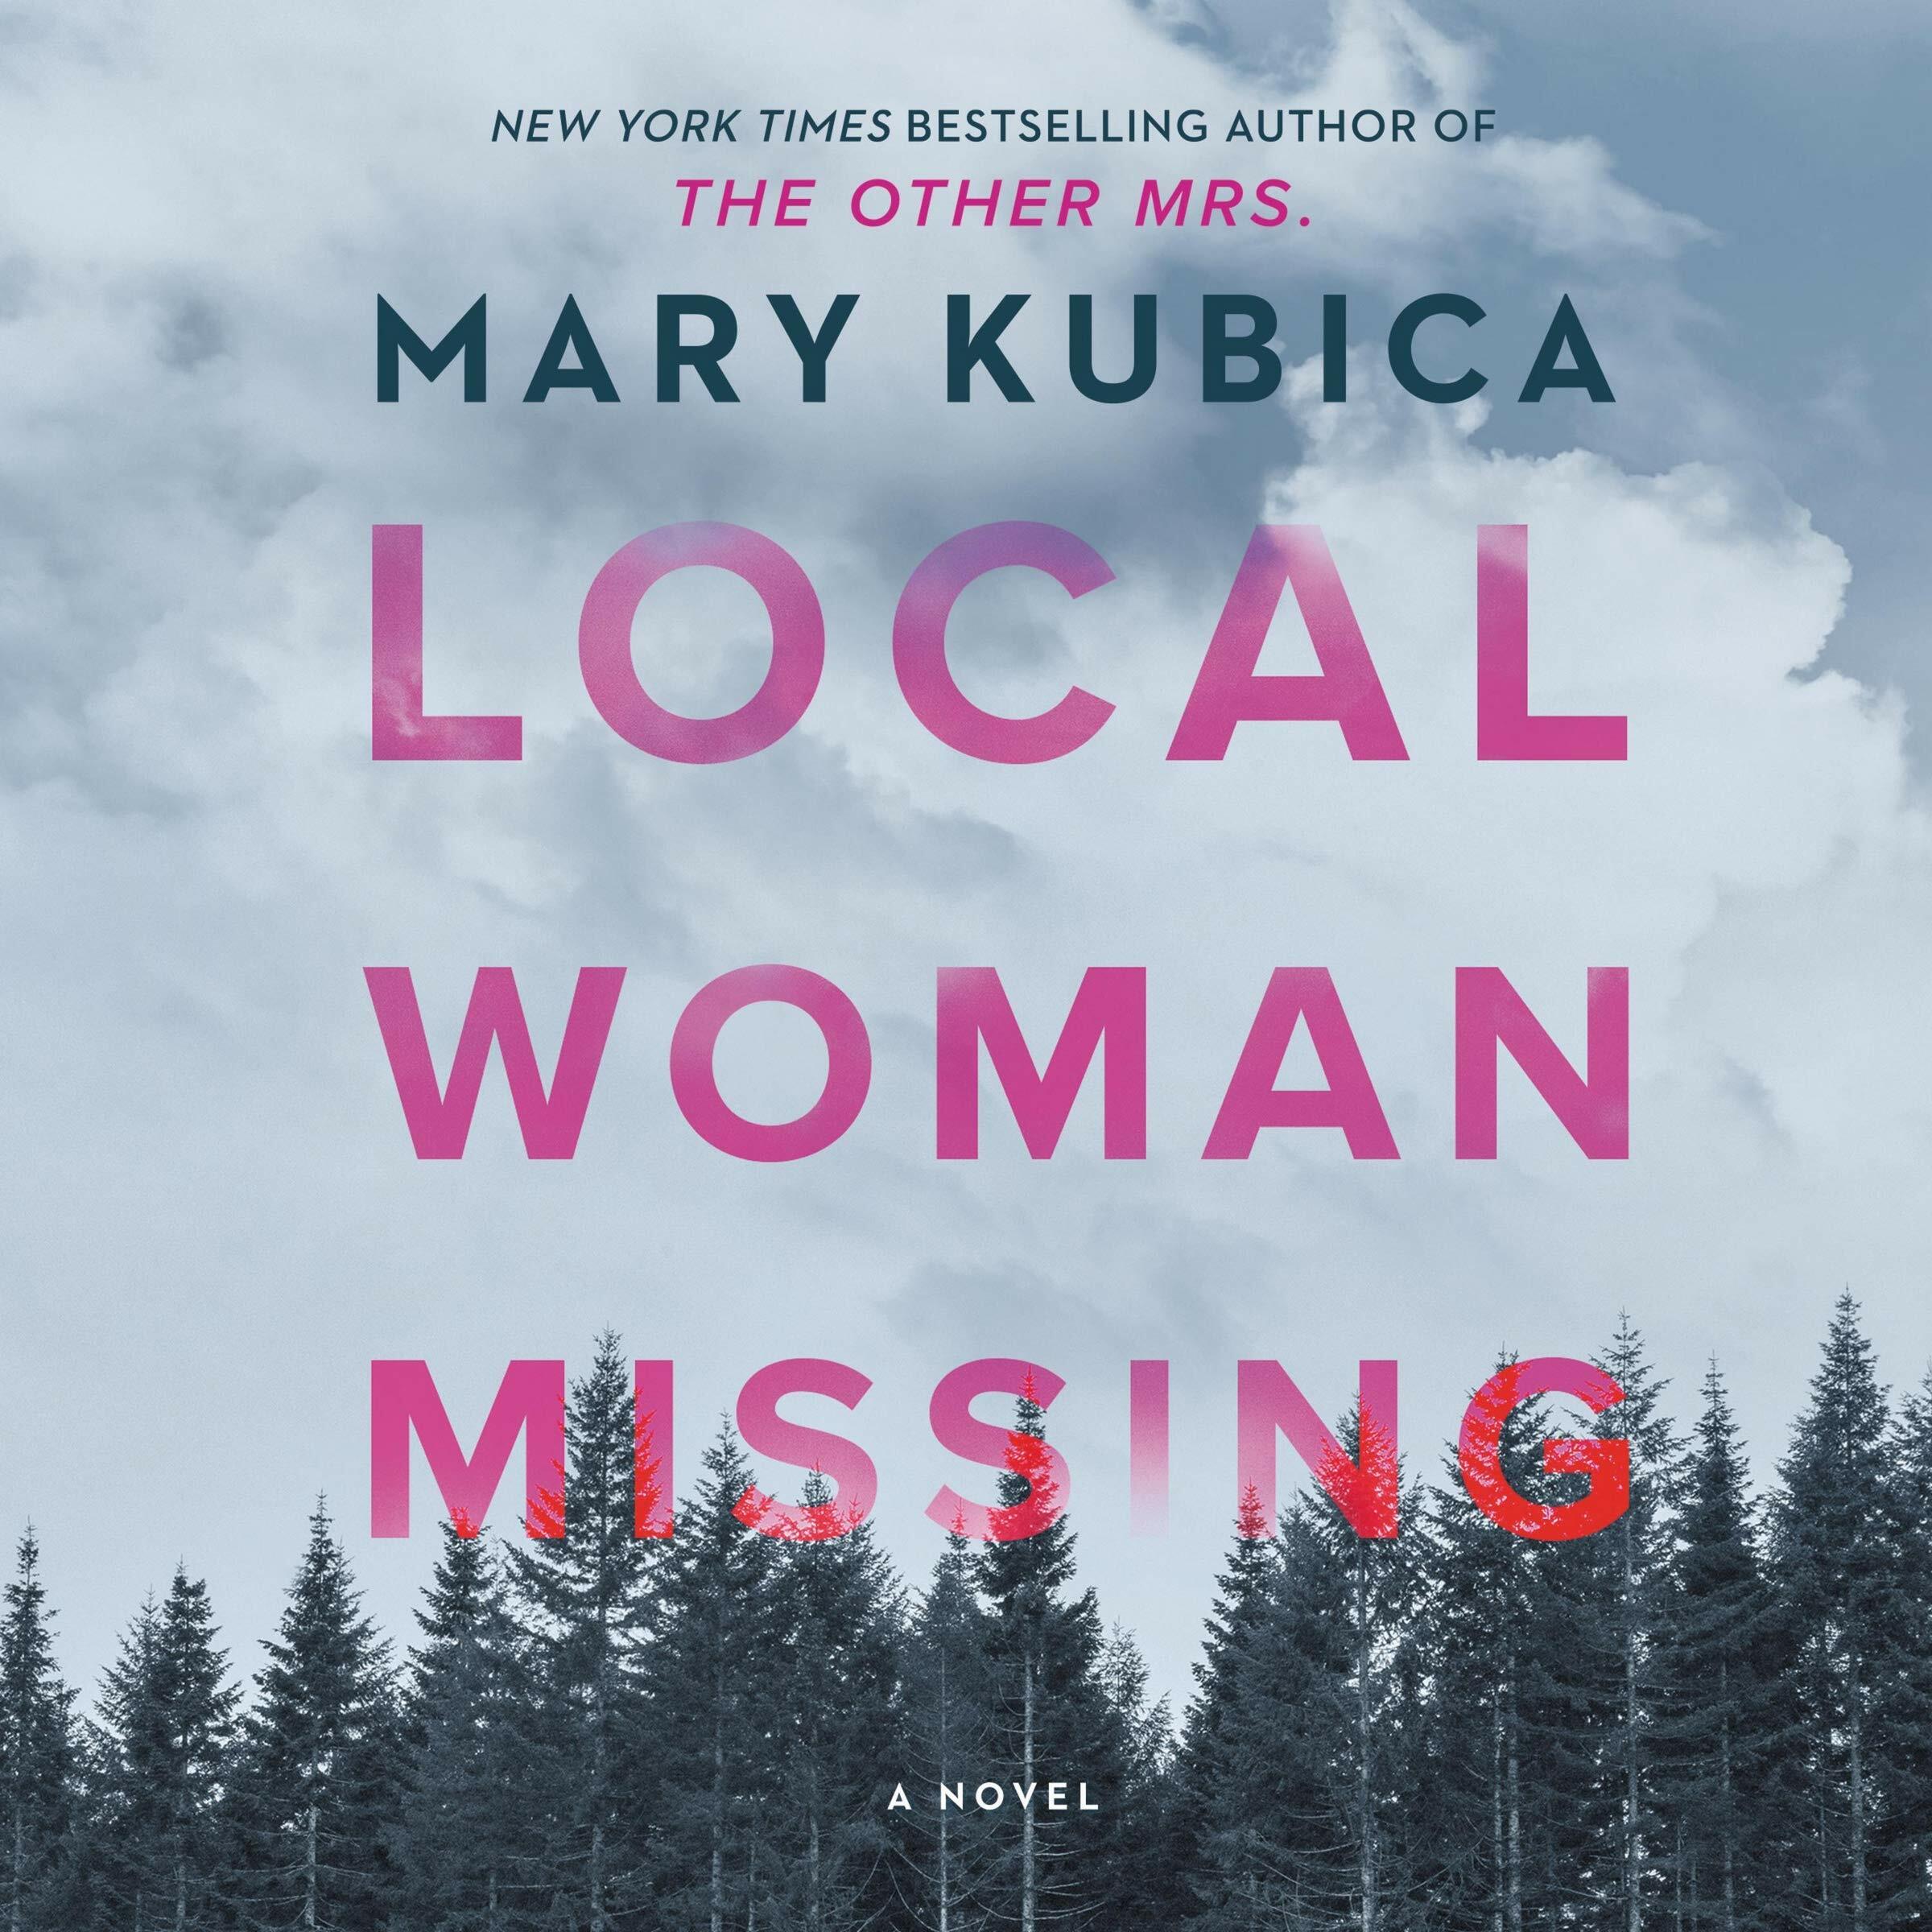 Local Woman Missing (Audio CD)